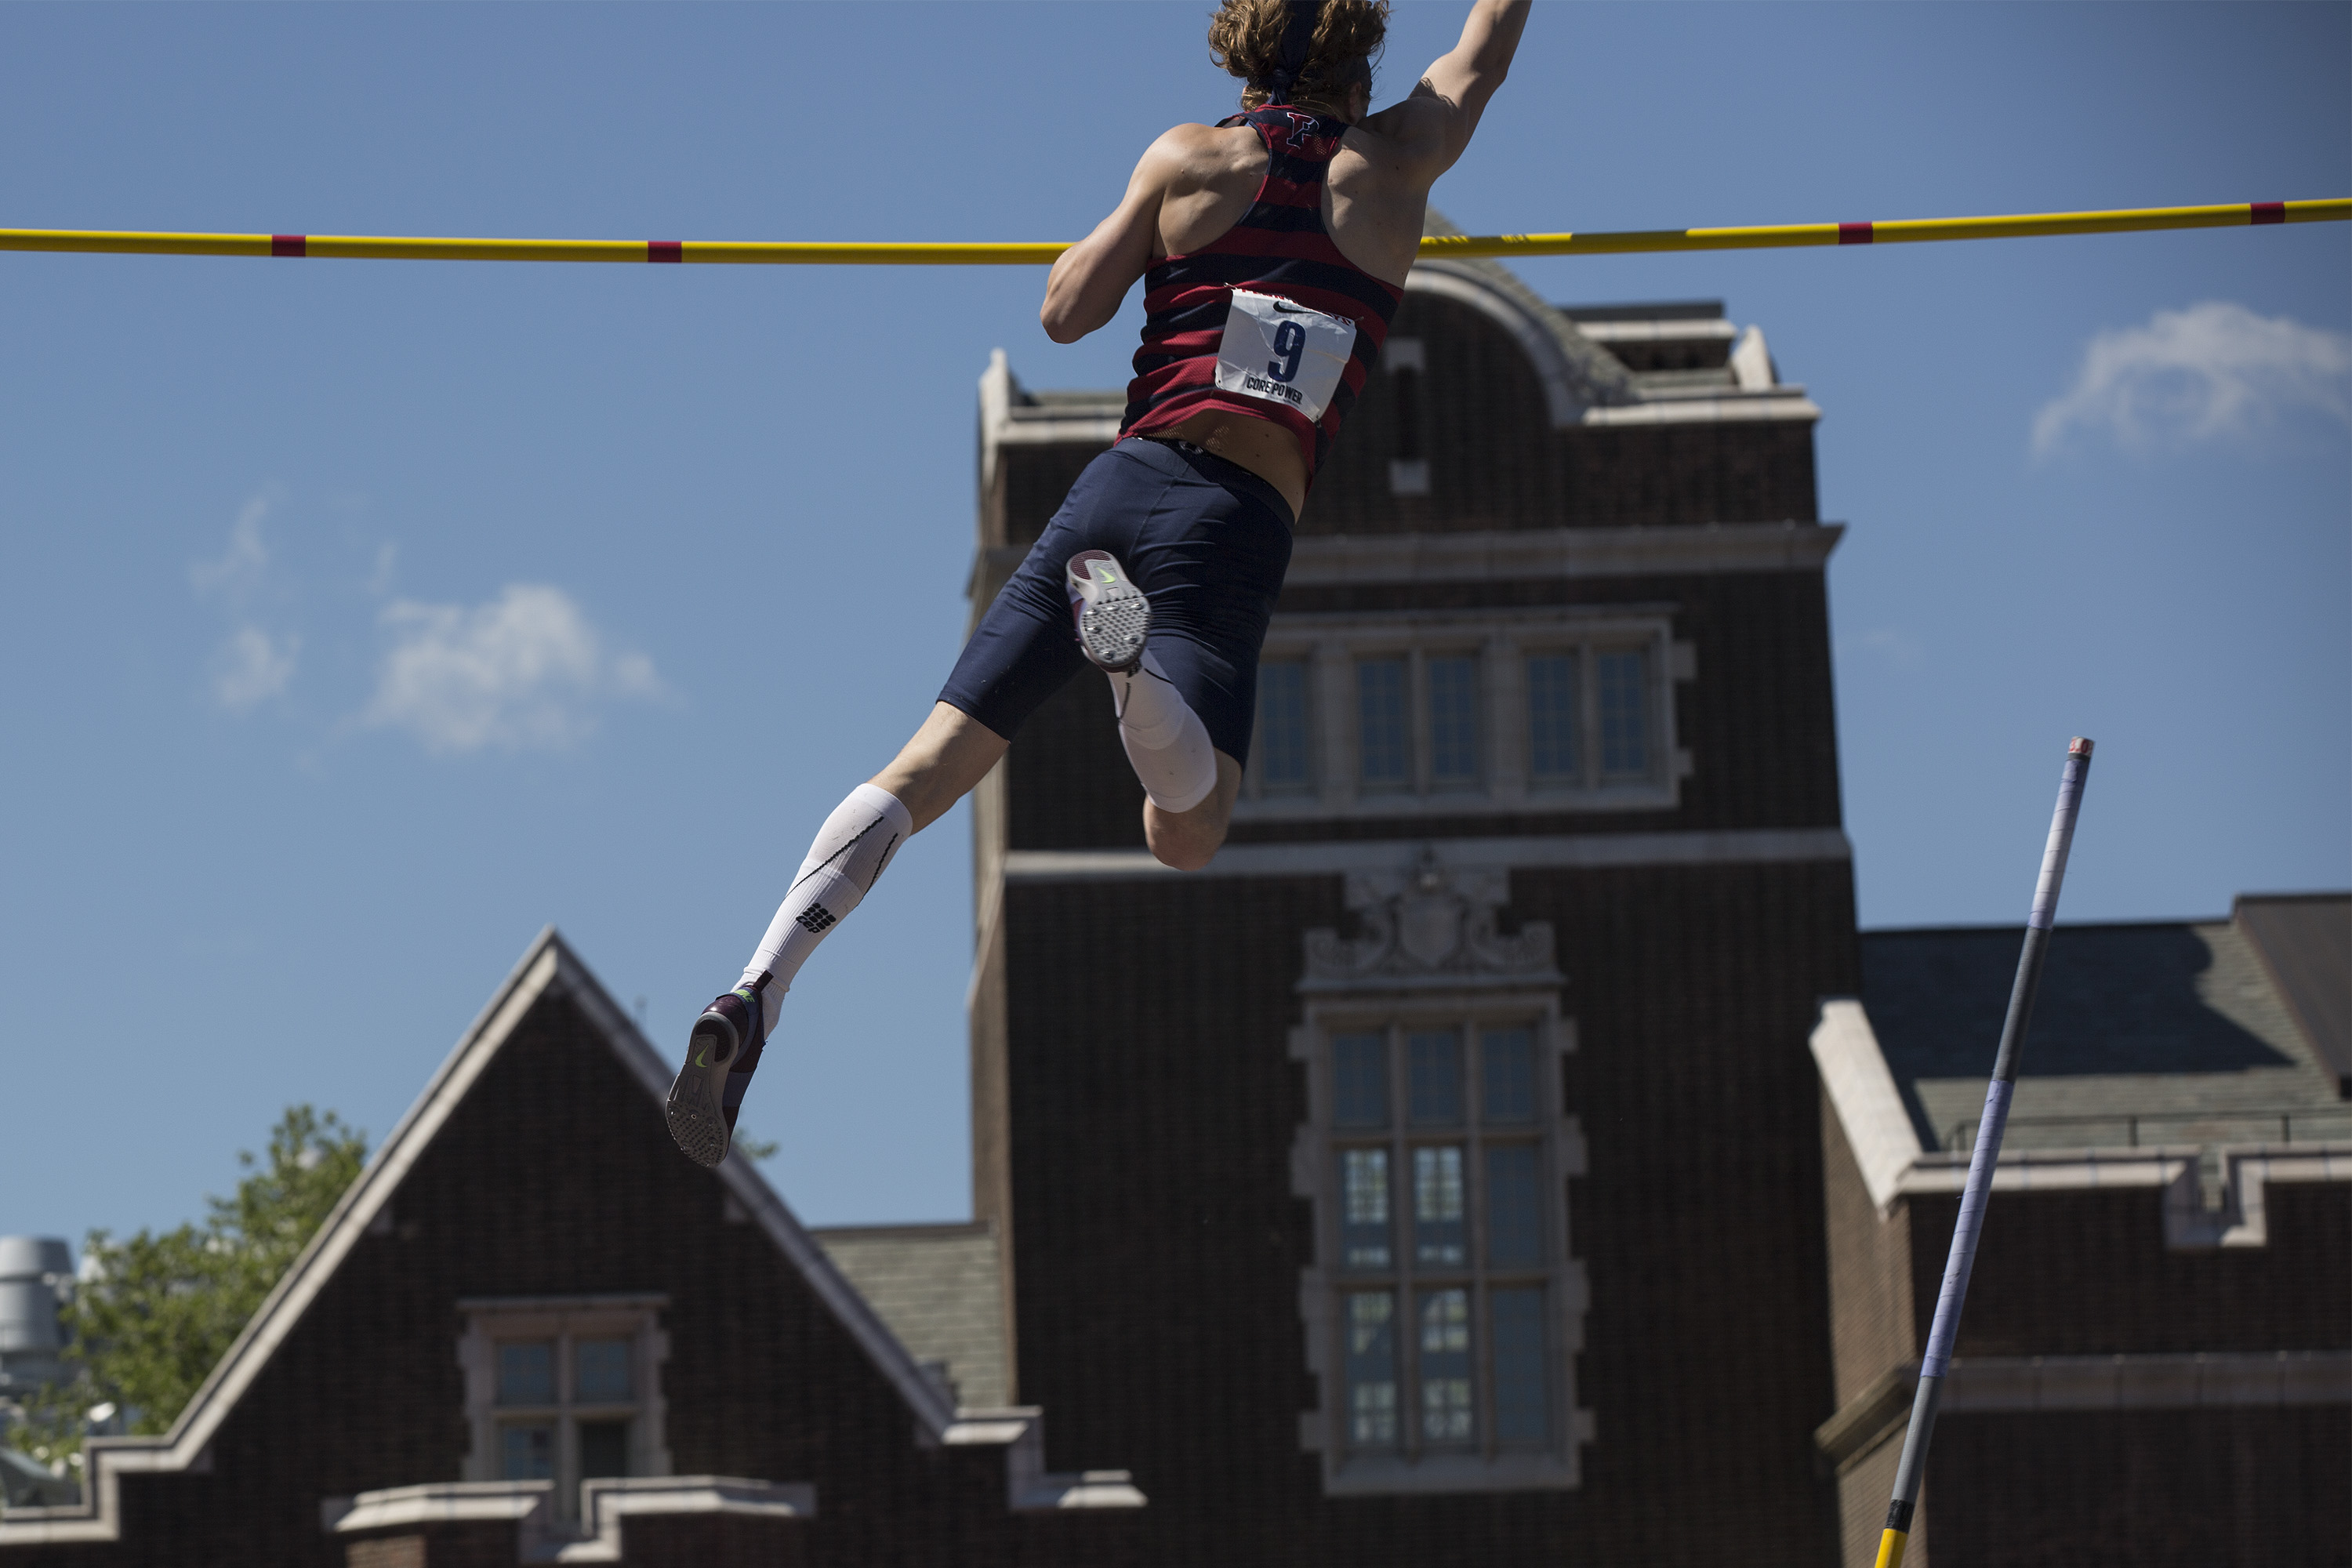 Payton Morris competes in the College Men's Pole Vault